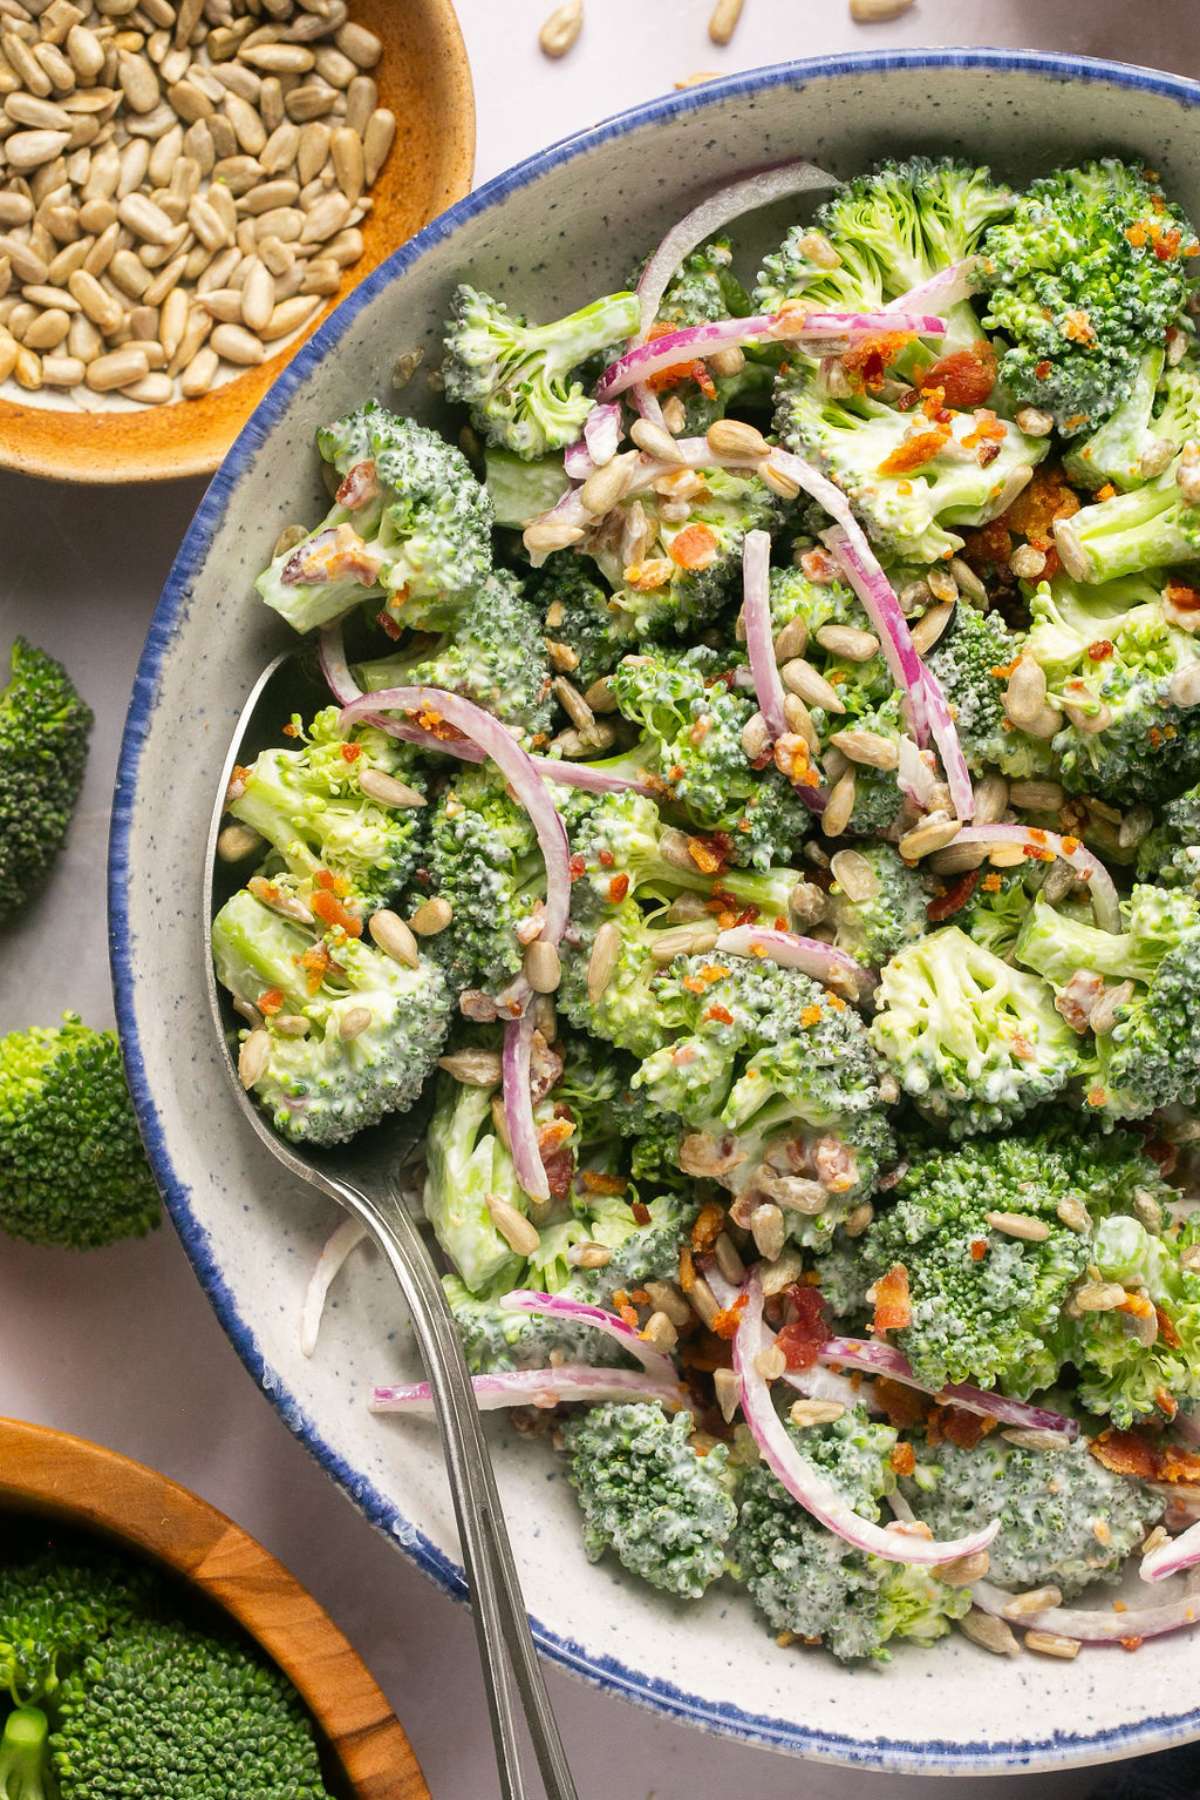 Healthy Greek Yogurt Broccoli Salad! A deliciously sweet salad with crunchy broccoli, bacon and more! No baking required. Just stir, chill and eat. The perfect warm weather salad that's higher in protein and good for you. Gluten Free + Low Calorie